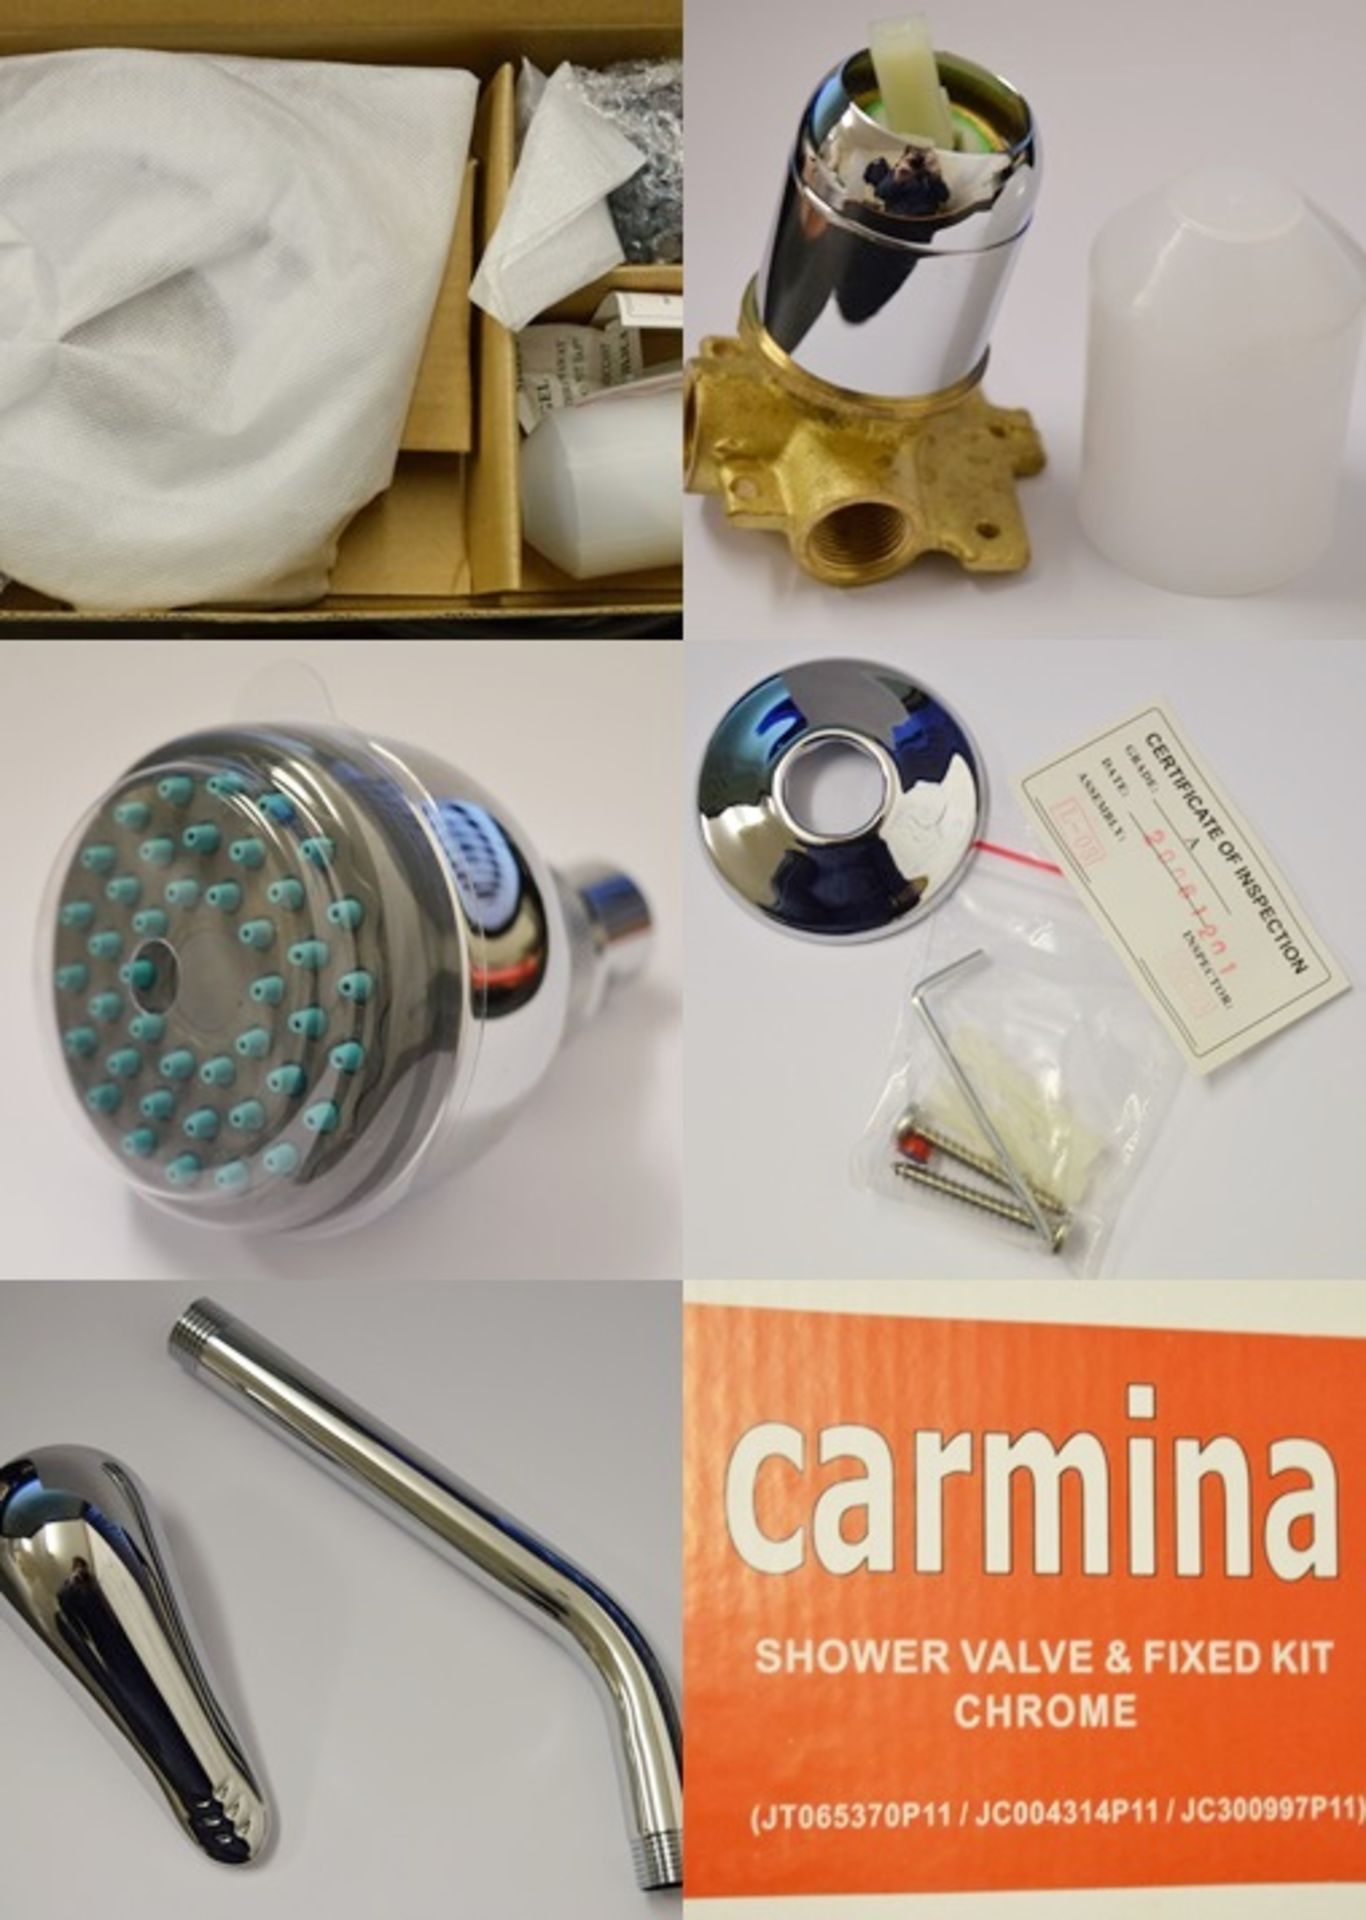 1 x Carmina Shower Valve Kit - Contains Chrome Shower Head, Fixed Arm and Manual Control - Brass - Image 13 of 13